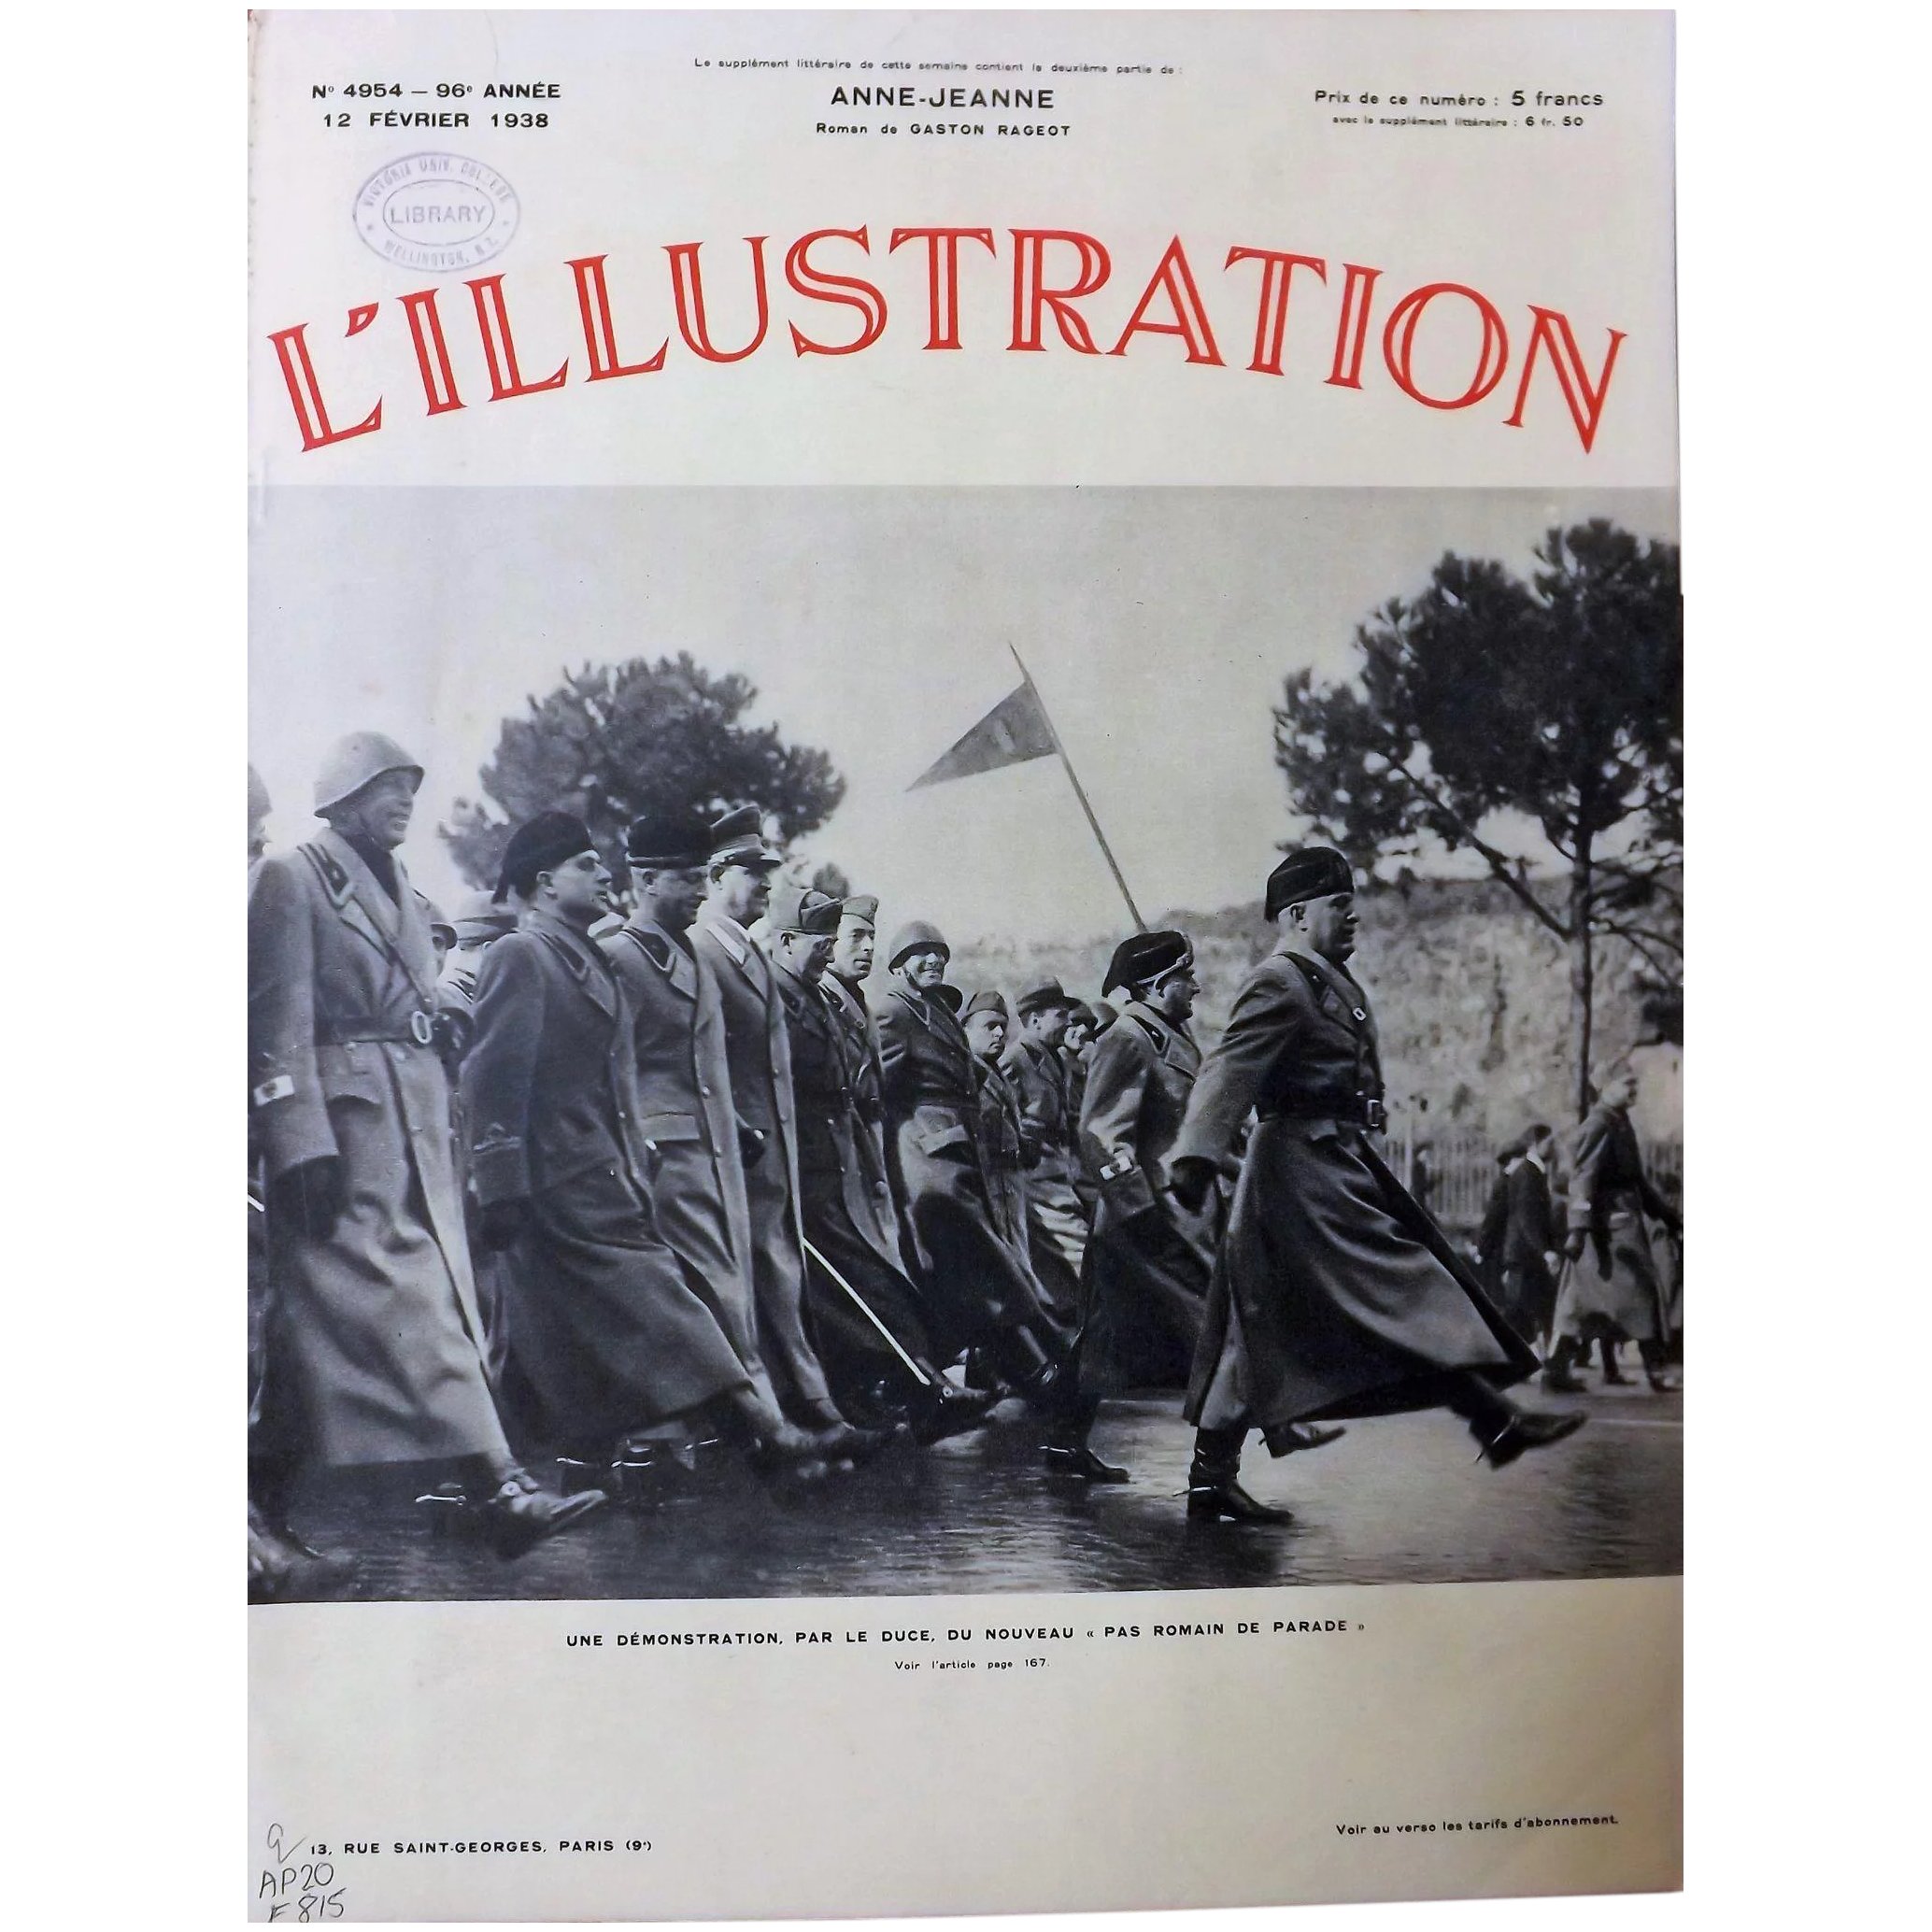 Mussolini on Parade - L 'Illustration Front Cover February 1938